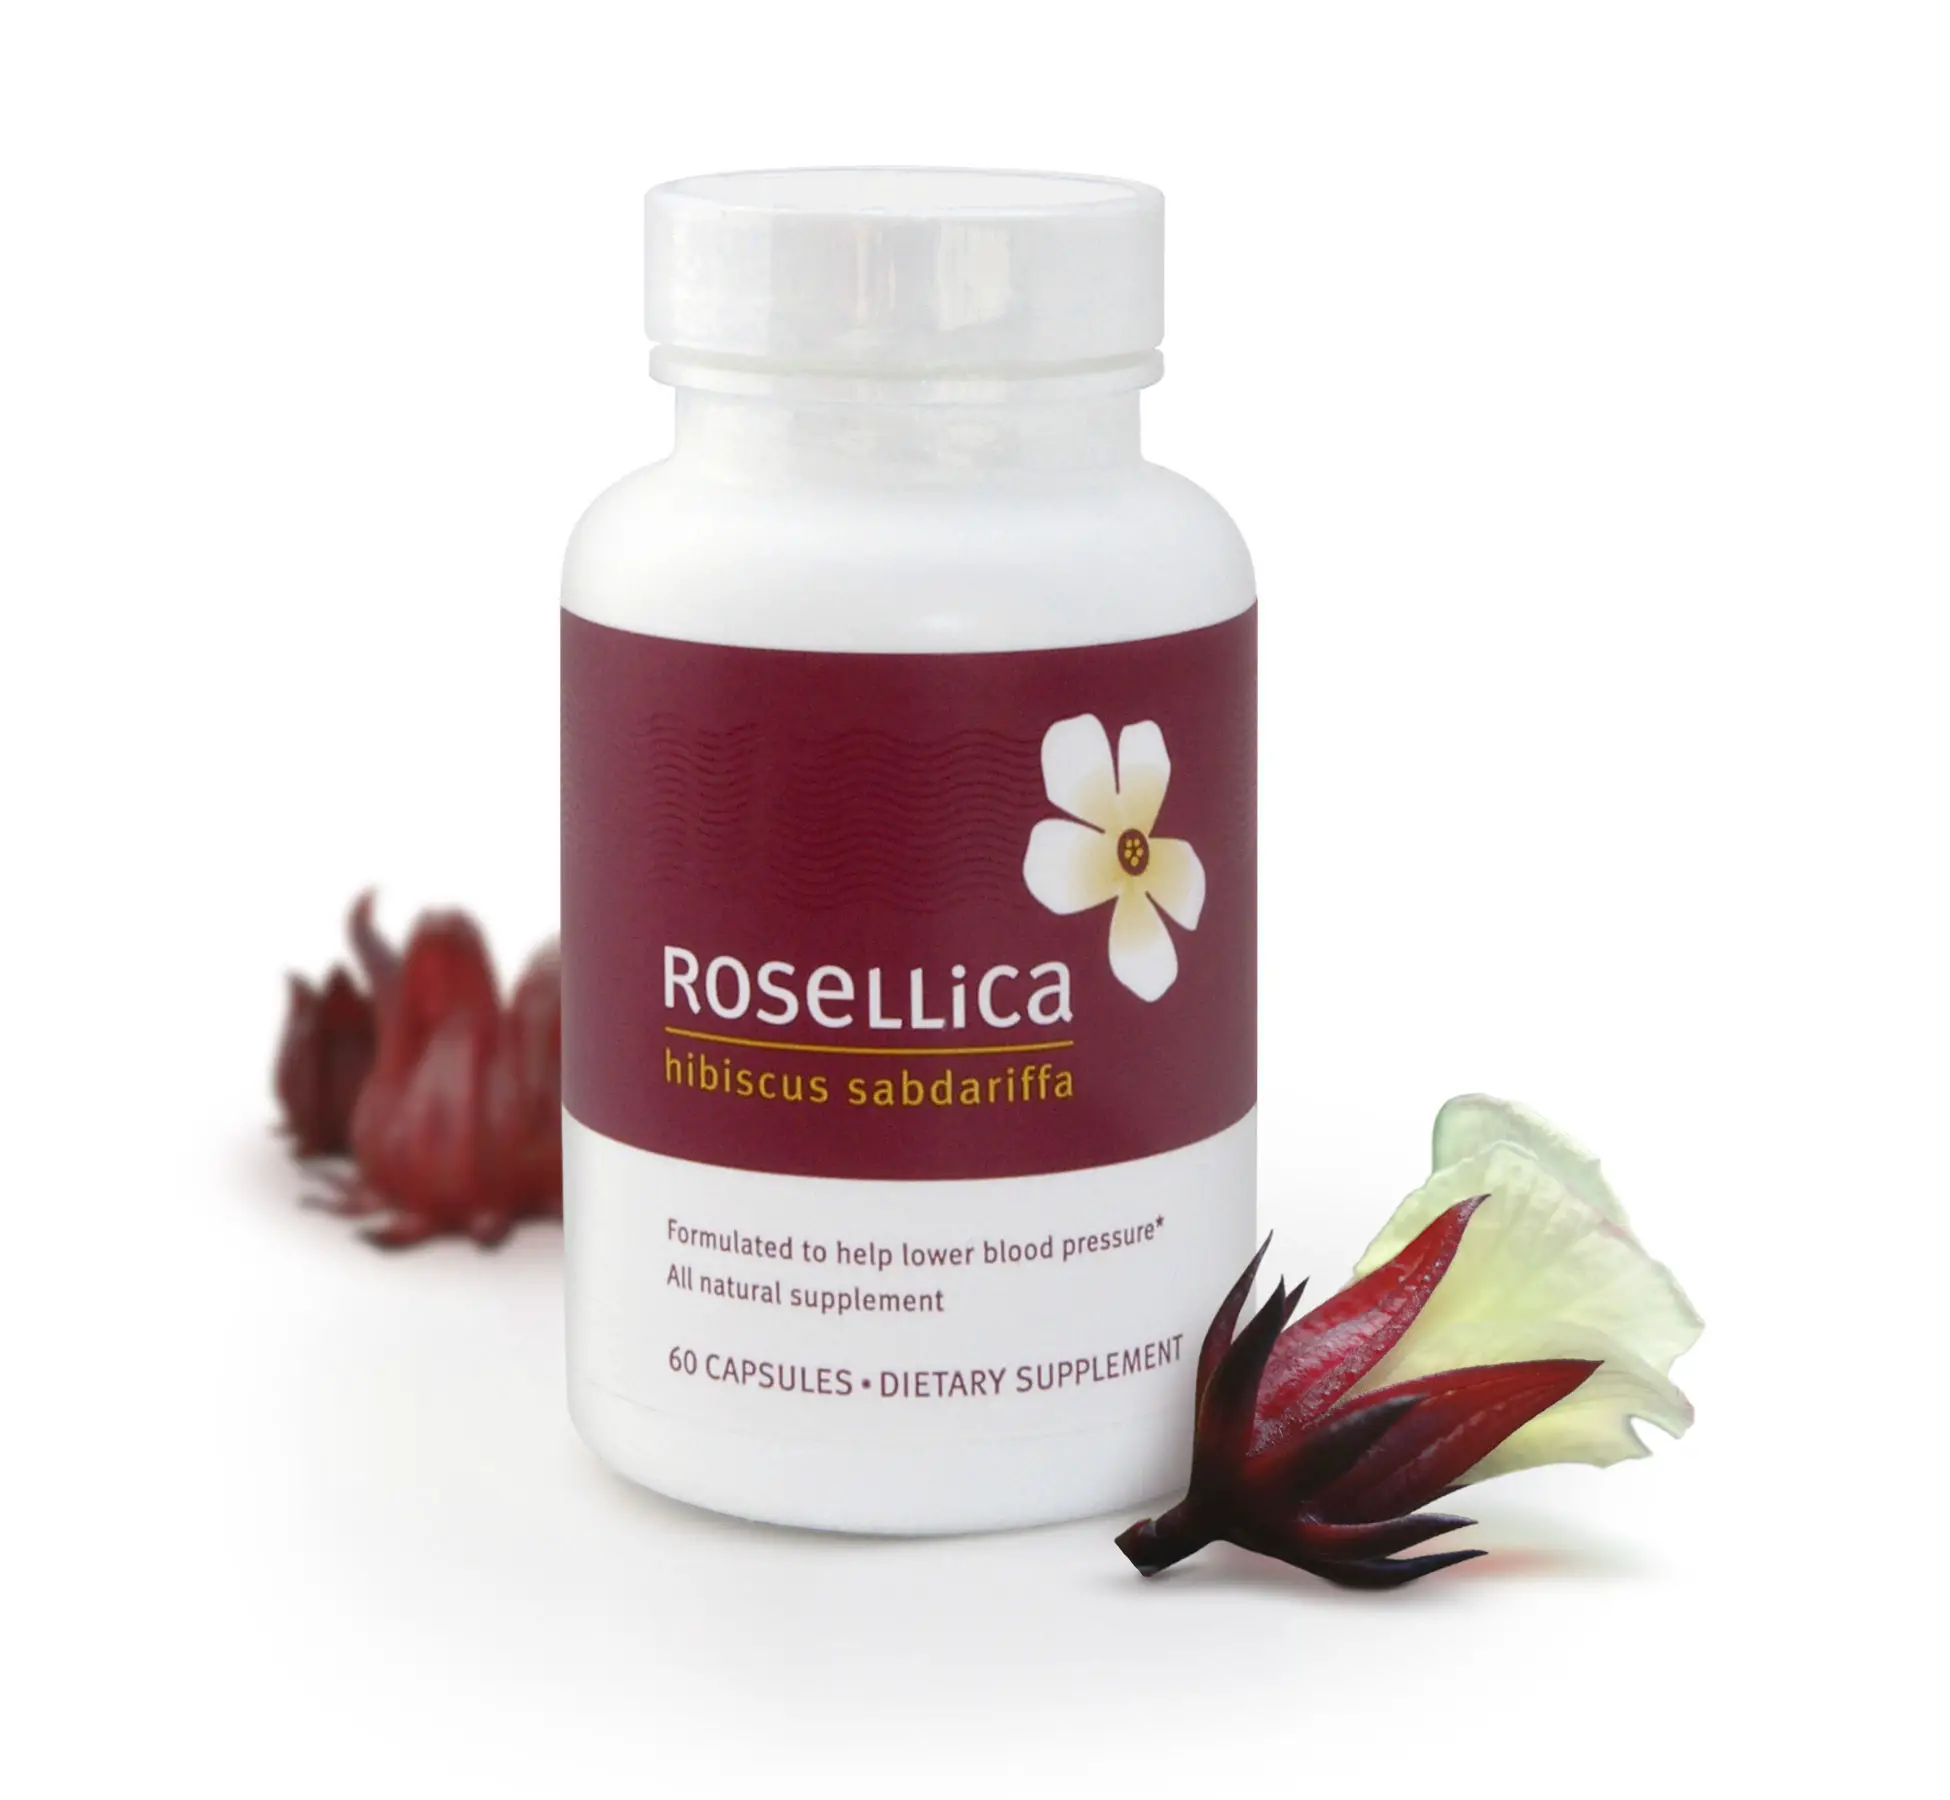 Janzee Inc. Announces an Update to Rosellica Hibiscus